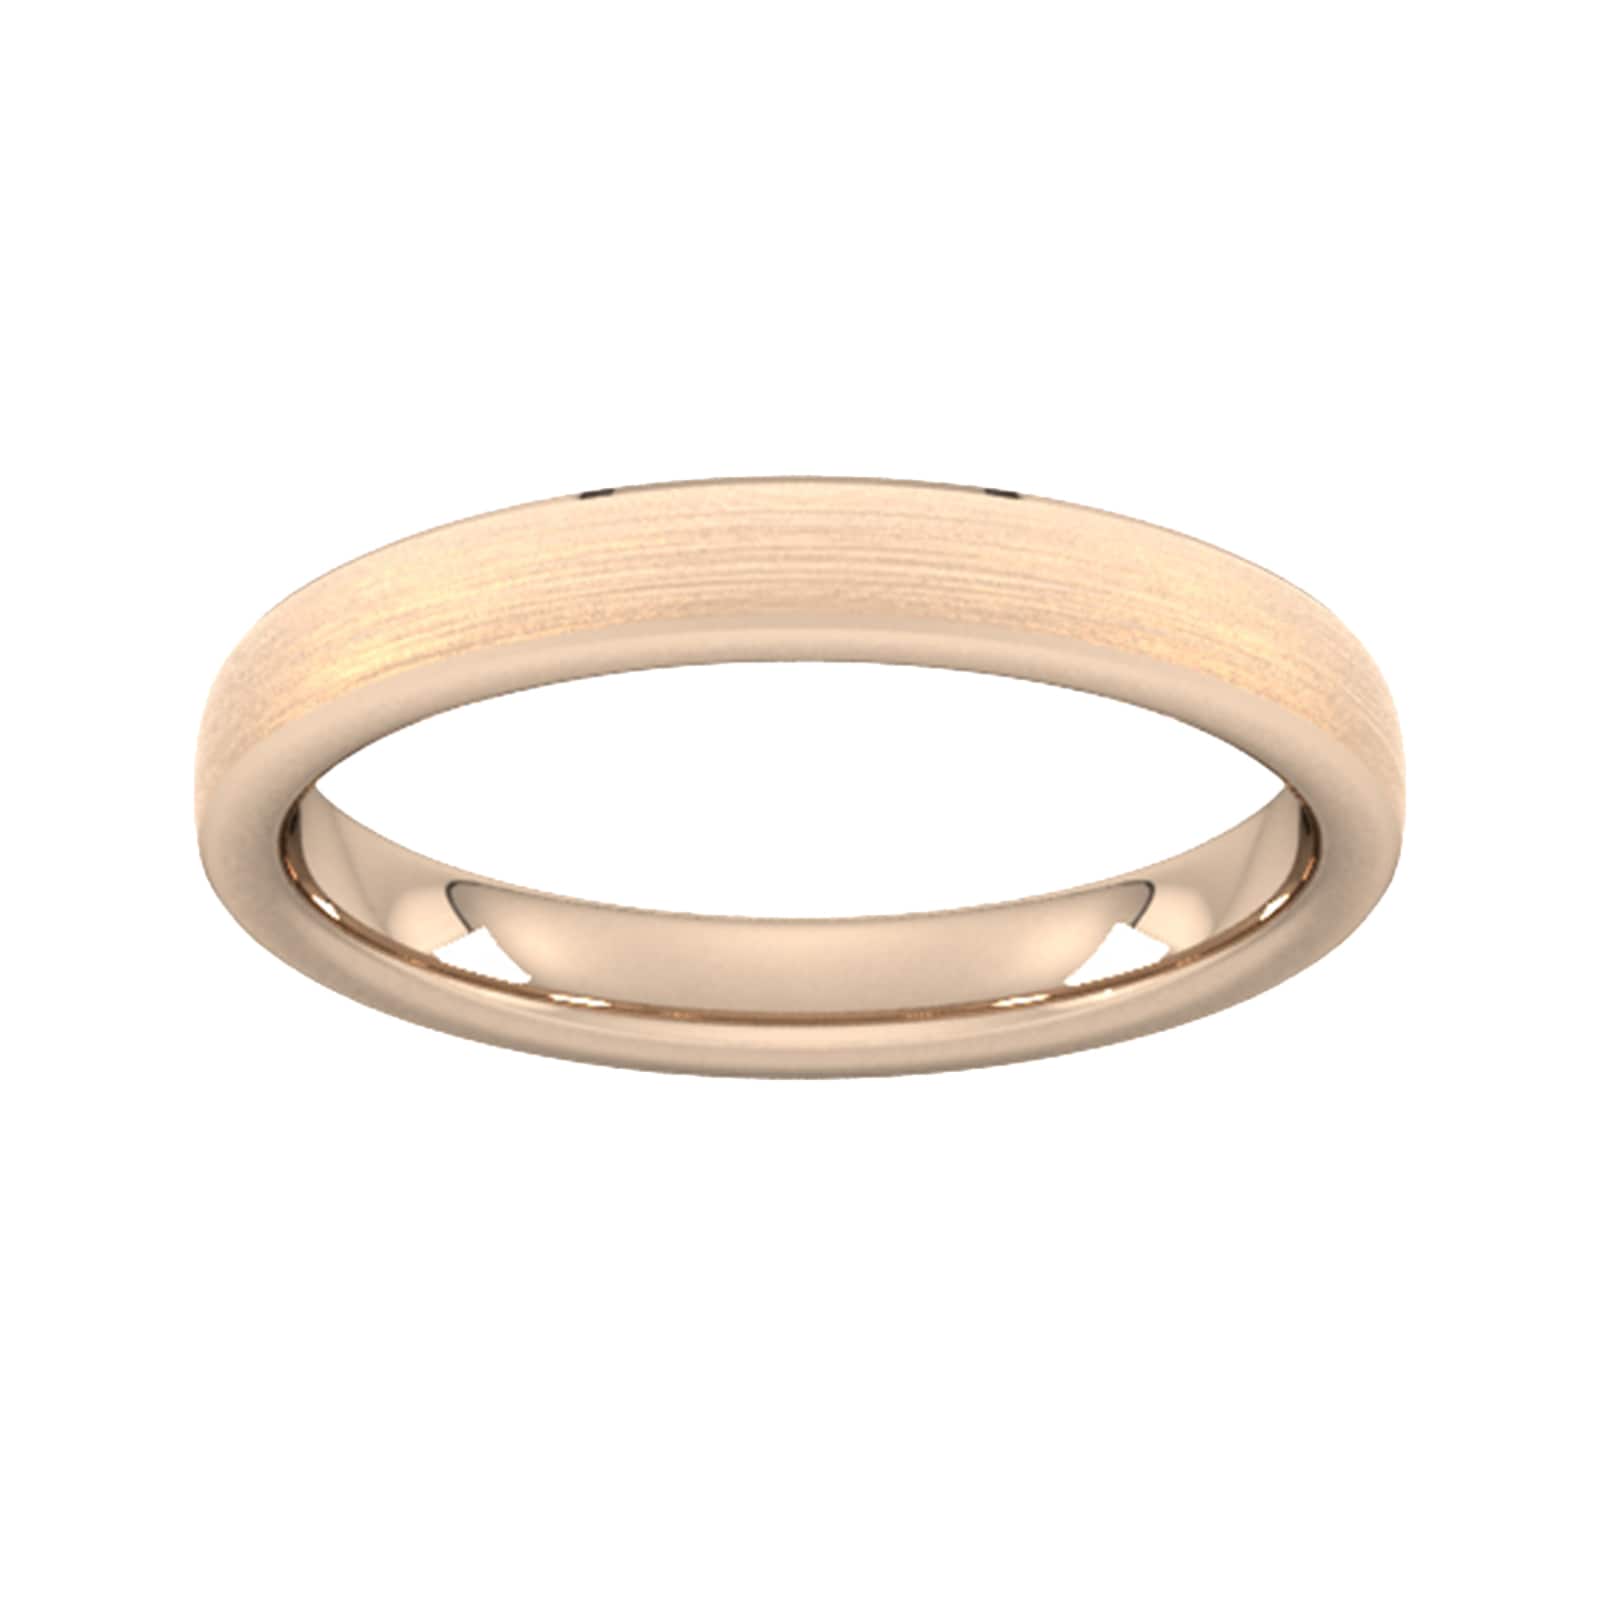 3mm Slight Court Standard Polished Chamfered Edges With Matt Centre Wedding Ring In 18 Carat Rose Gold - Ring Size Y